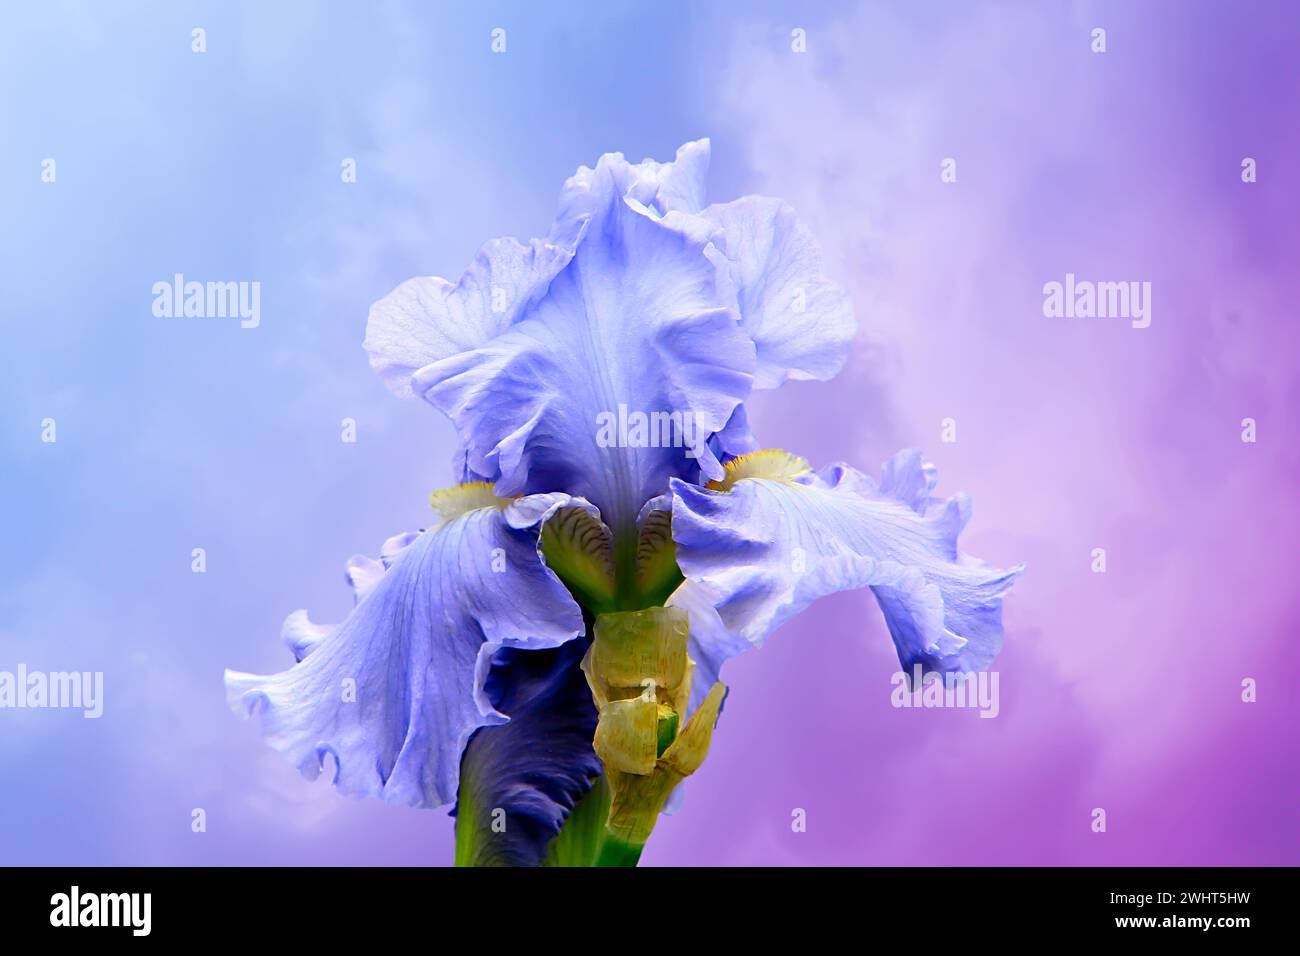 Purple flower with yellow stalk and tilted head Stock Photo